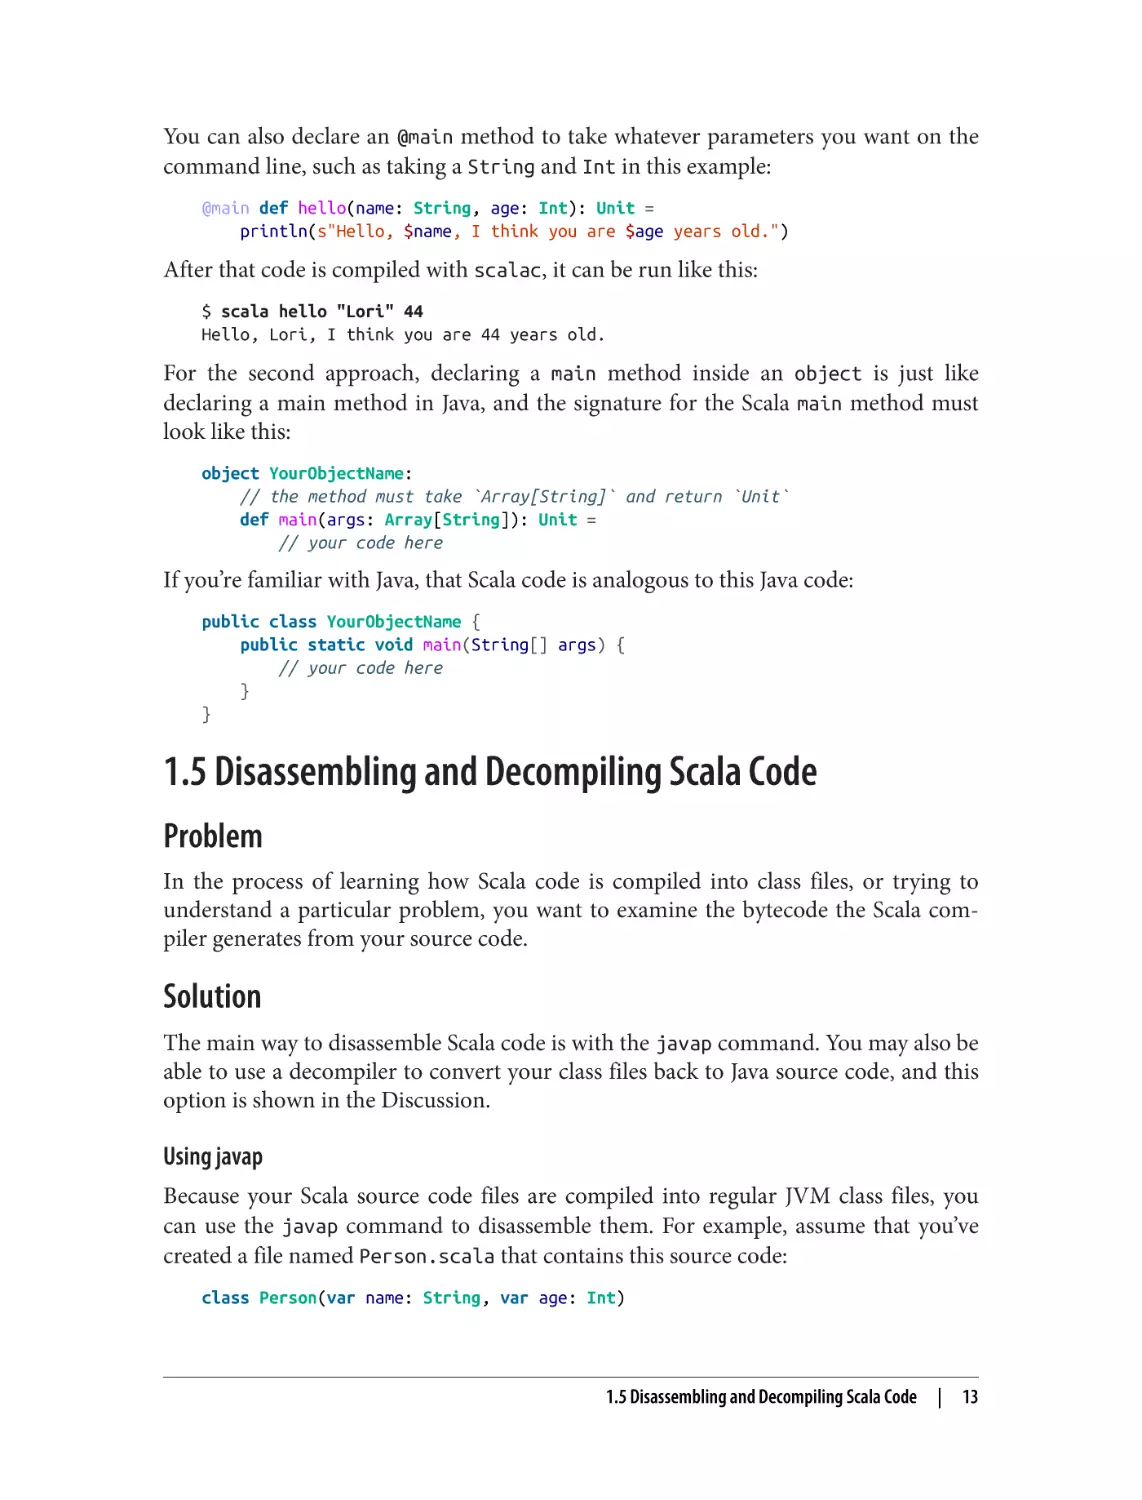 1.5 Disassembling and Decompiling Scala Code
Problem
Solution